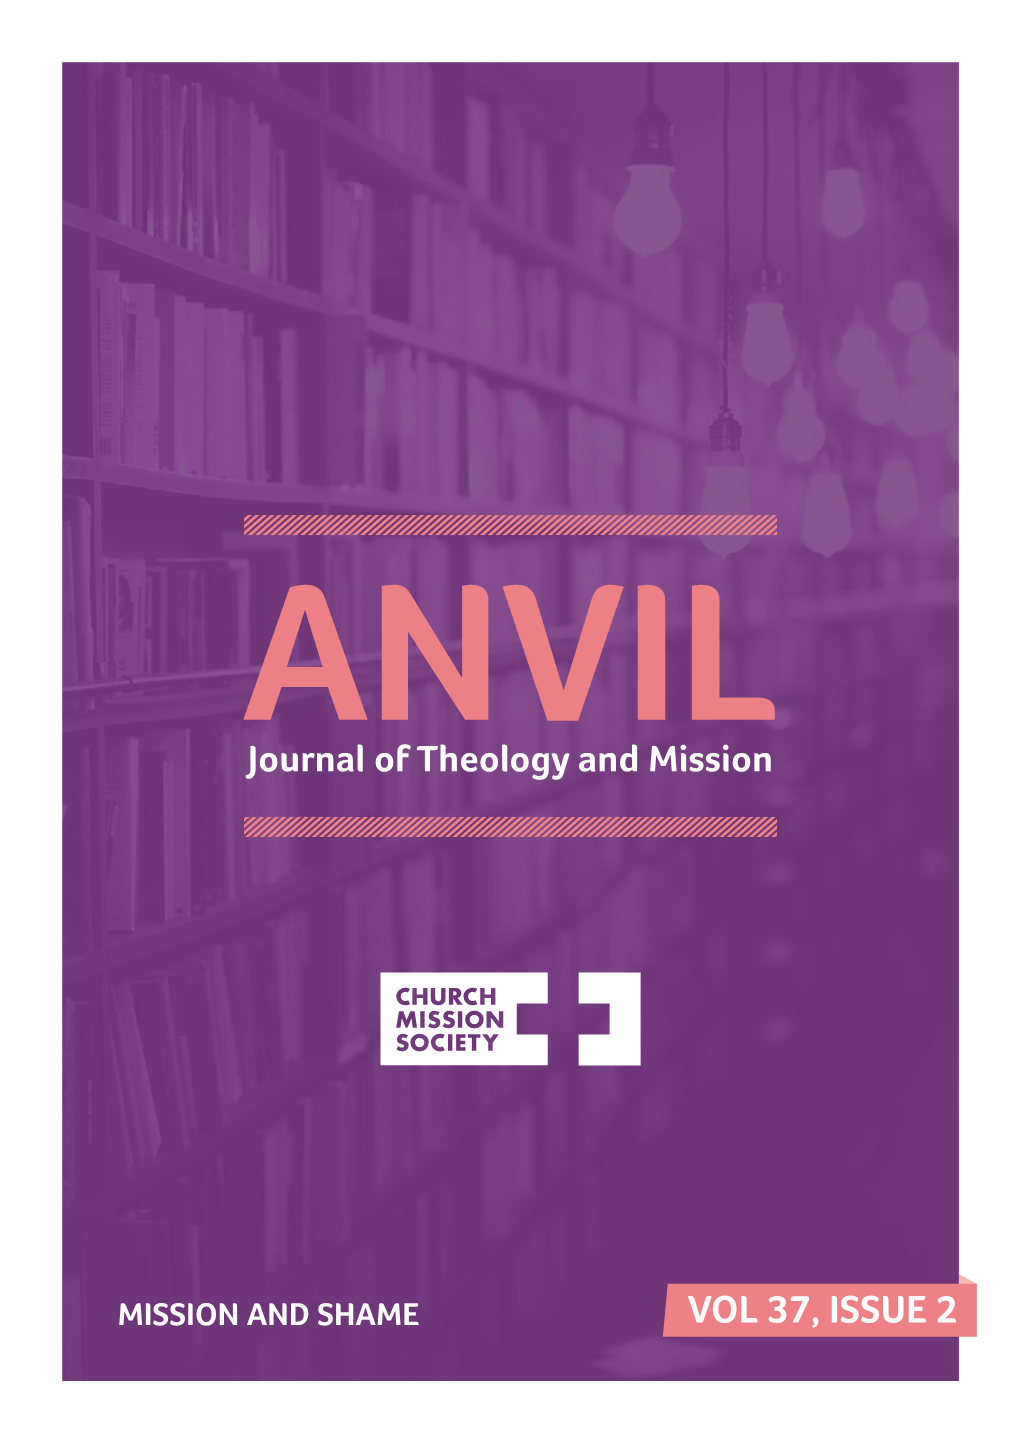 Vol 37, Issue 2 Welcome to This Edition of Anvil